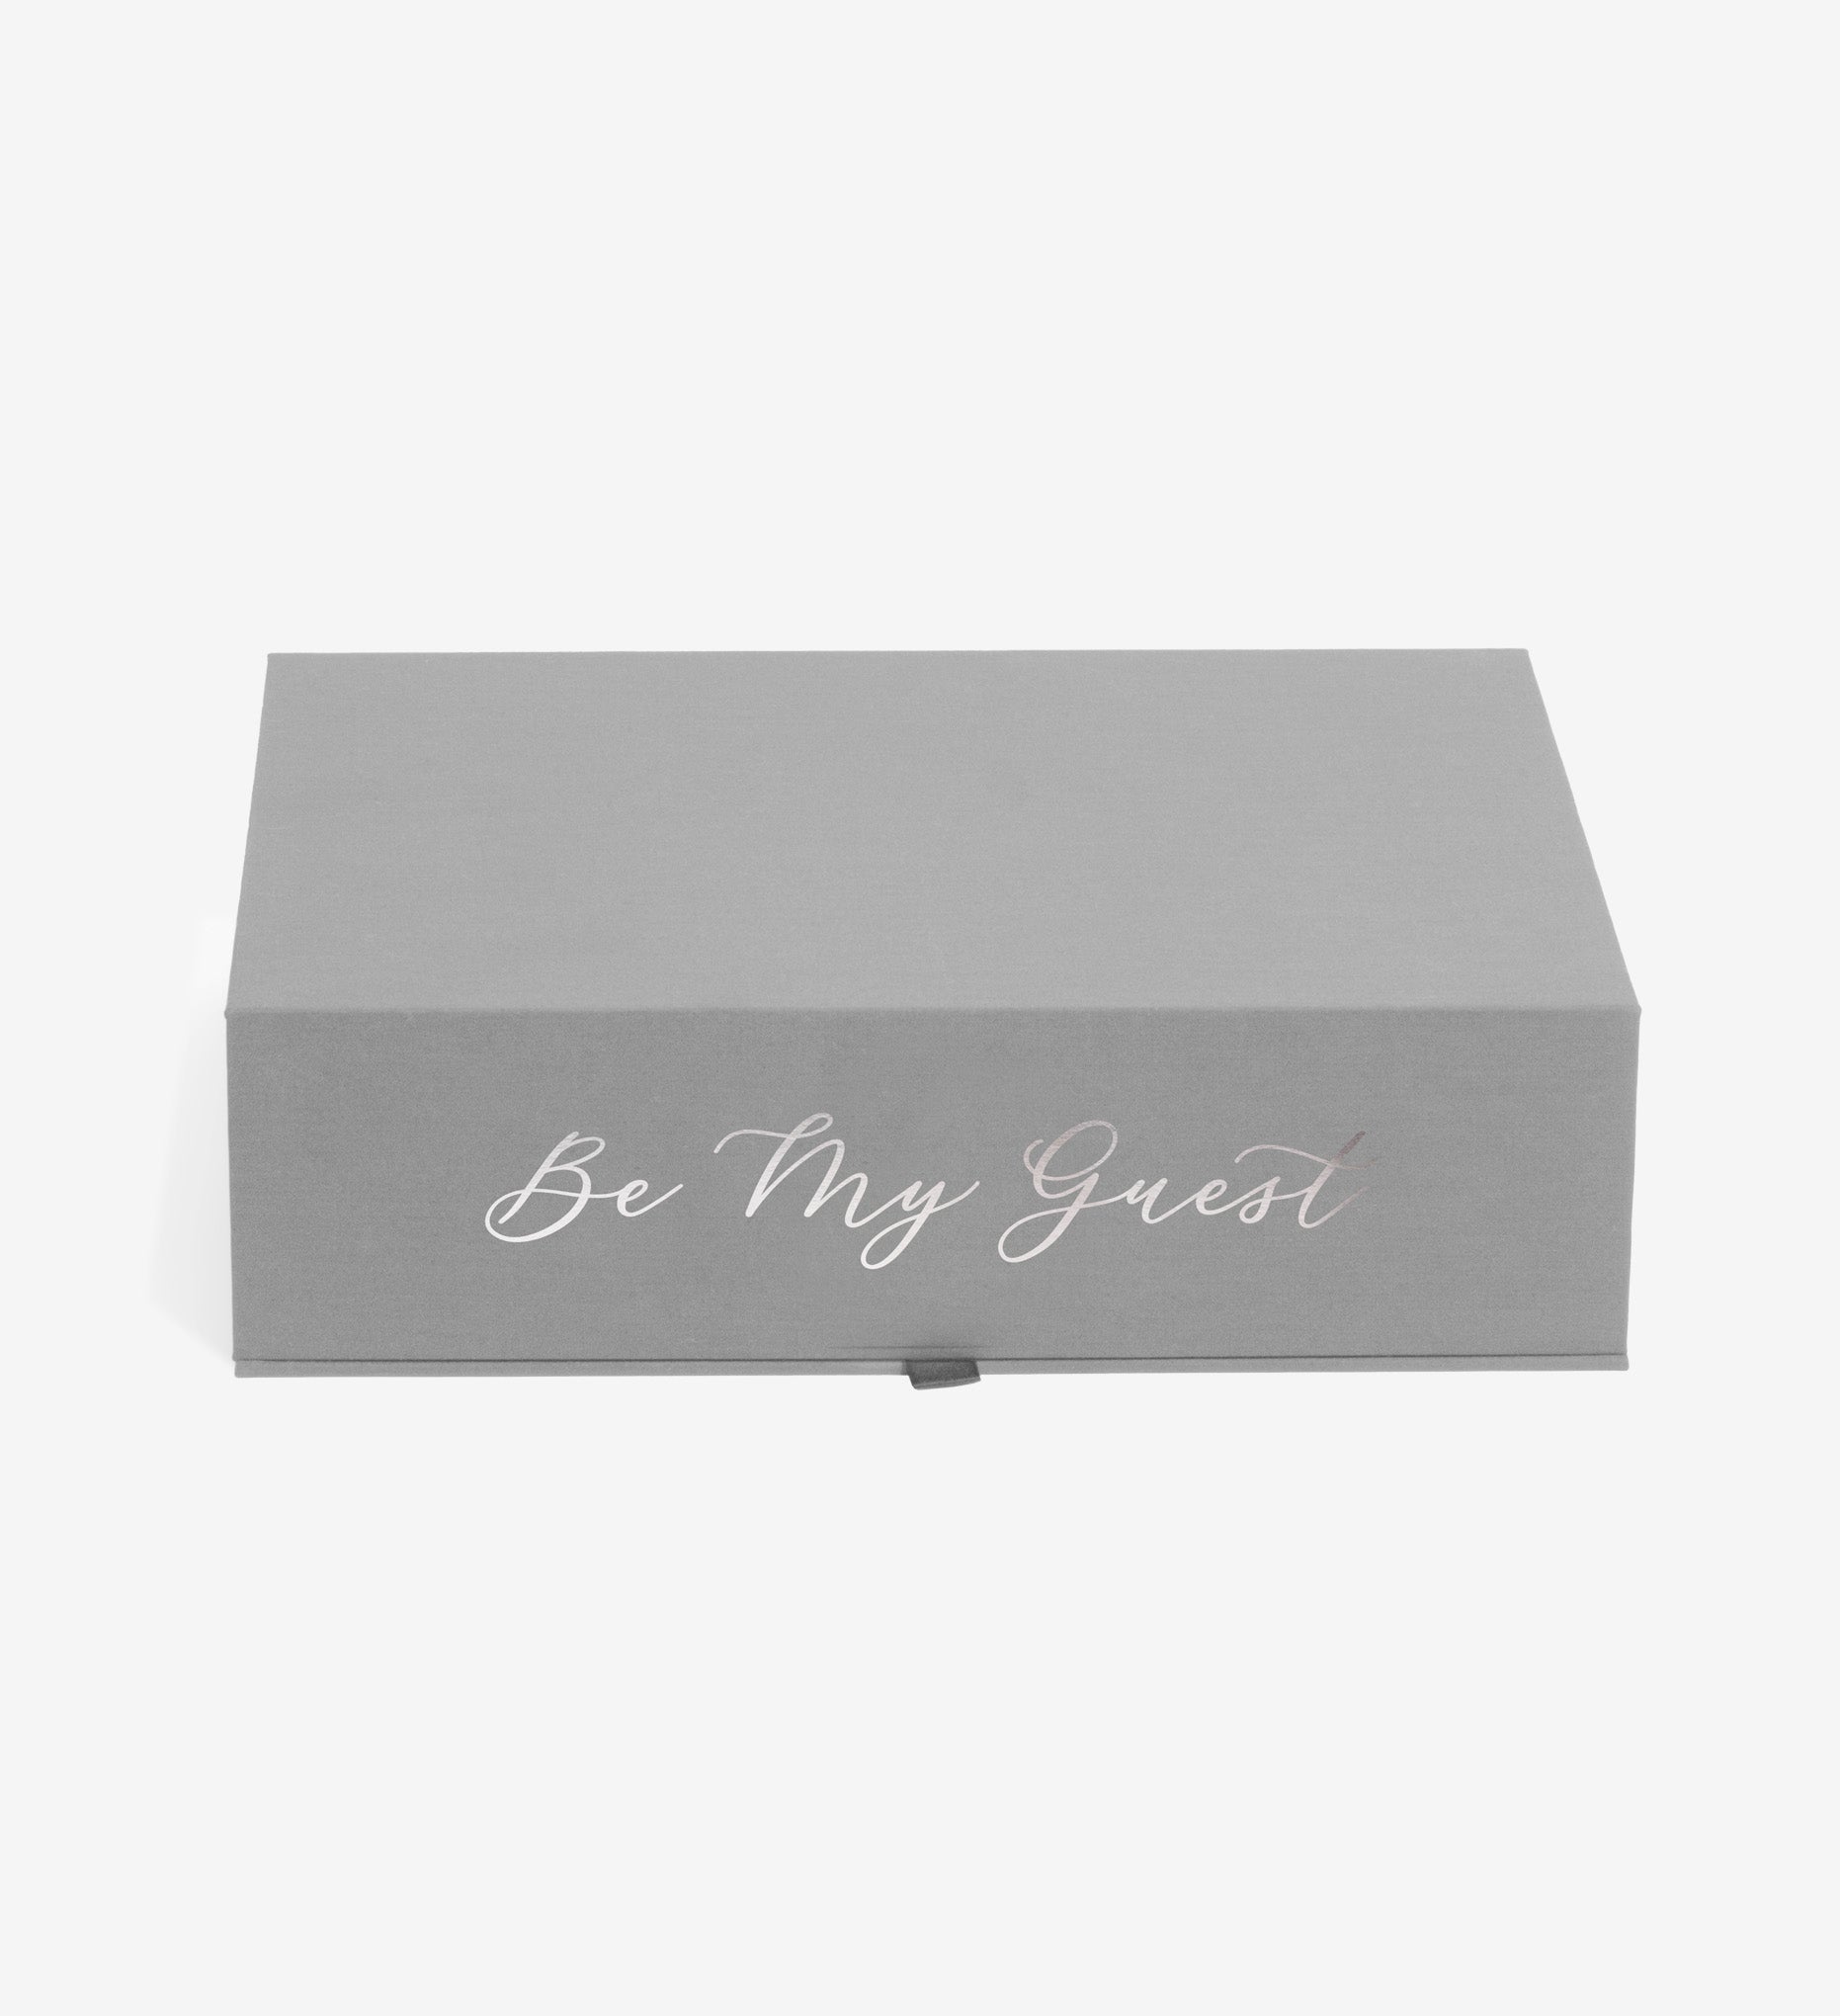 closed slate safe deposit box personalized with be my guest